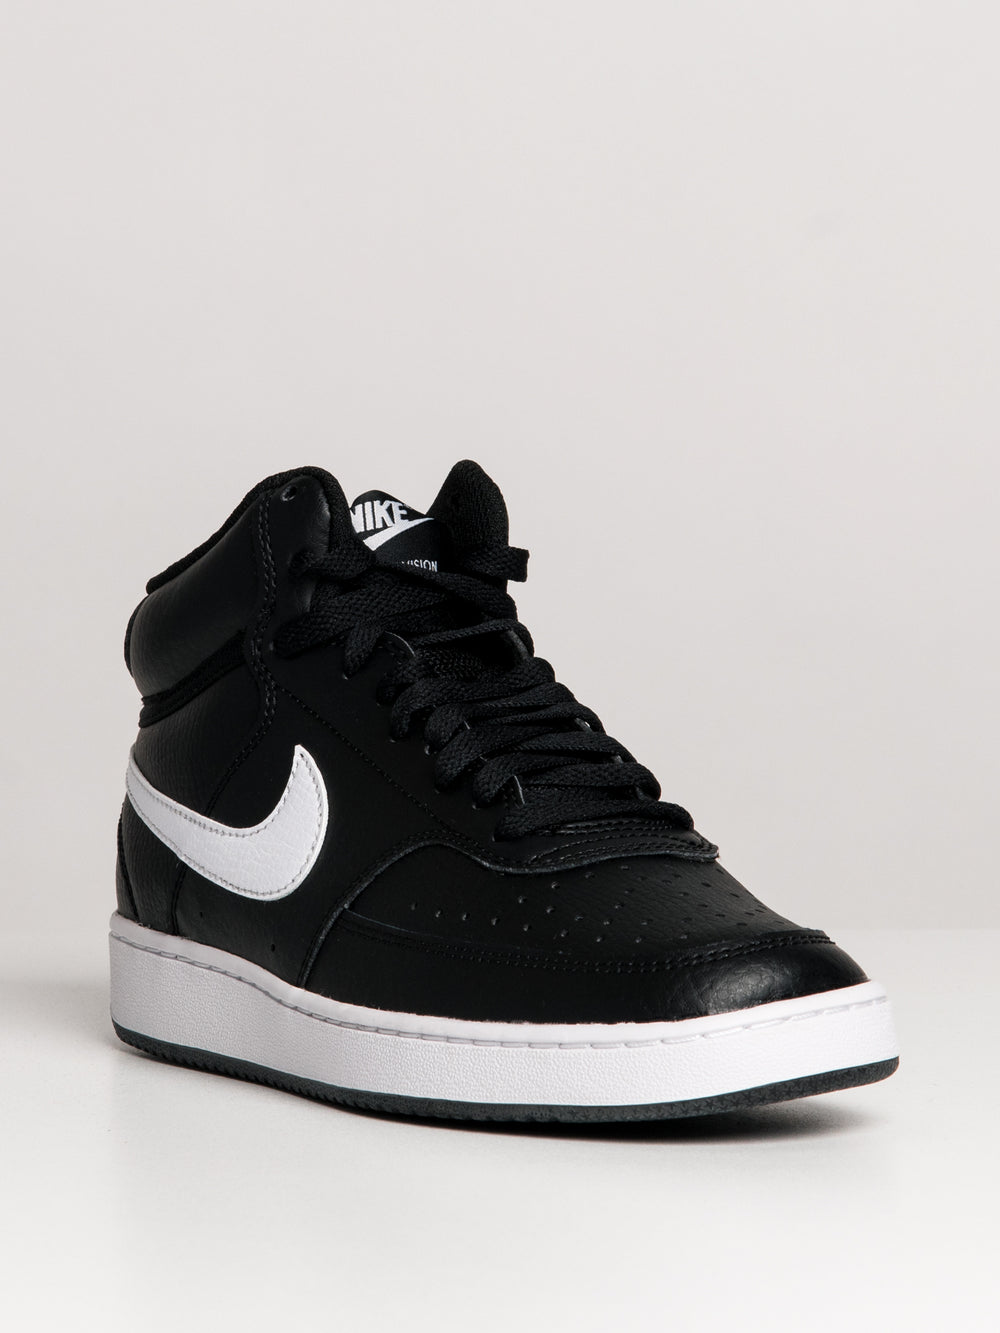 WOMENS NIKE COURT VISION MID SNEAKER - CLEARANCE